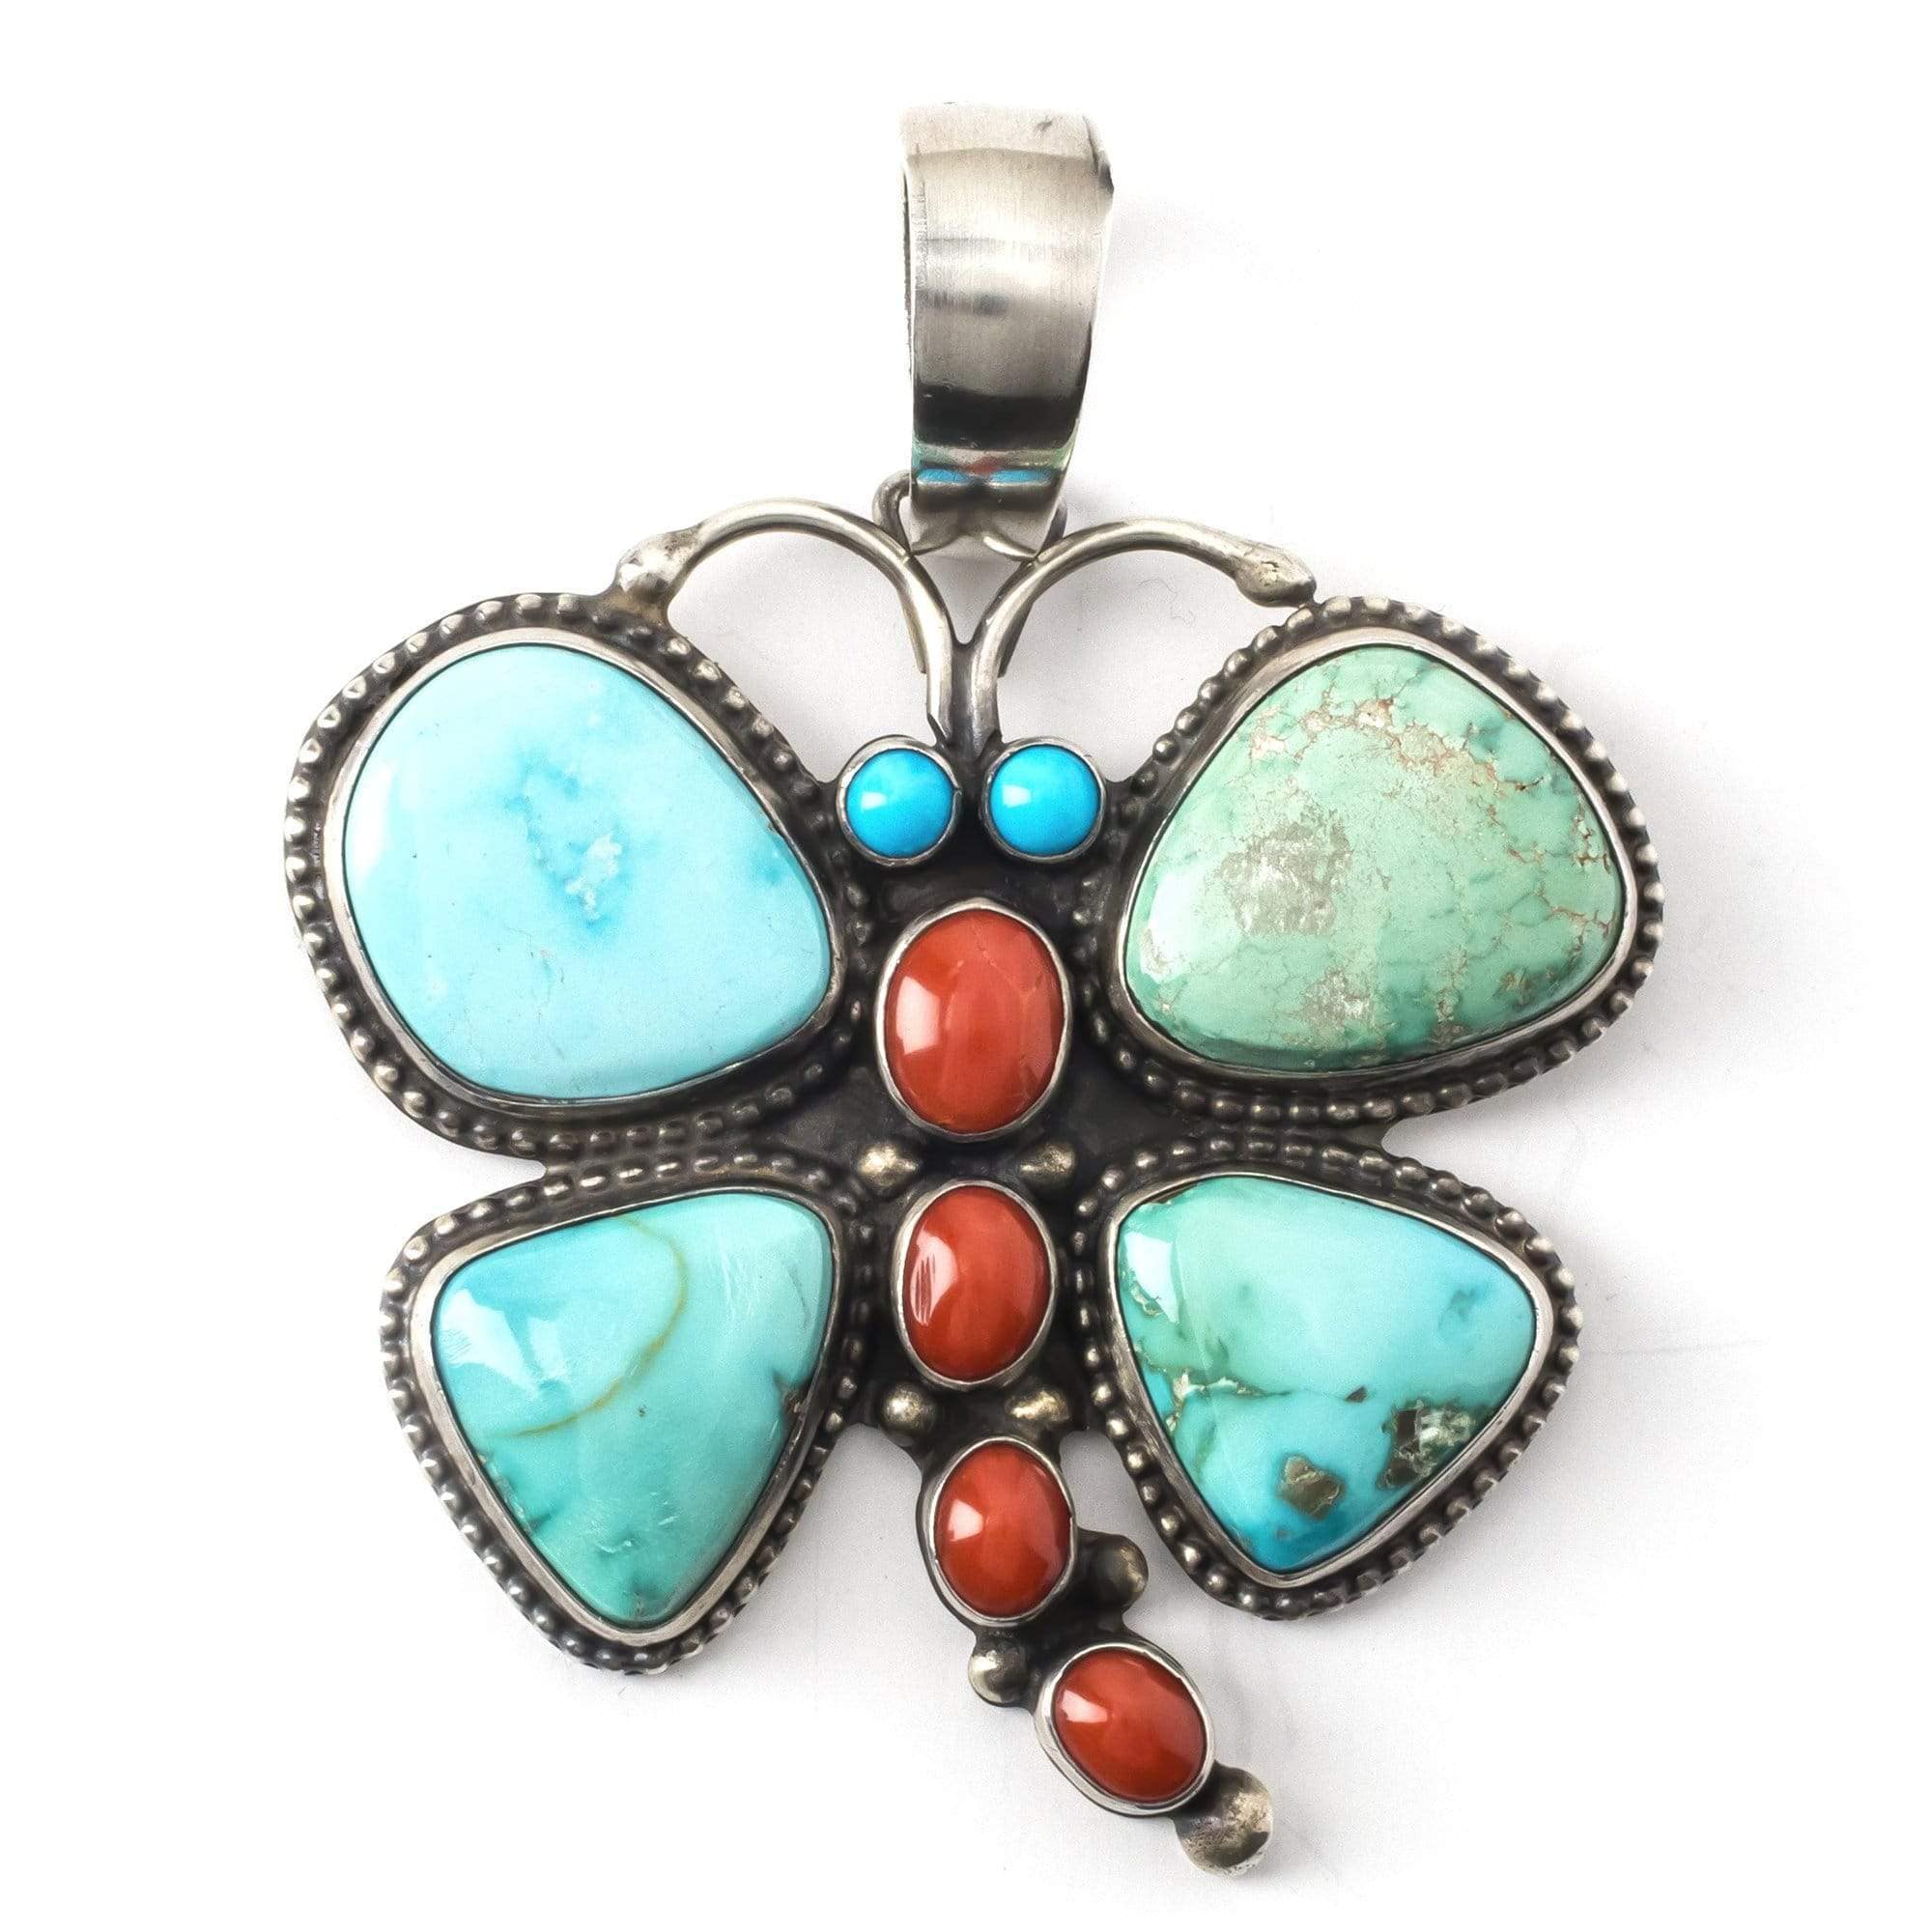 Kalifano Native American Jewelry Raymond Beard Carico Lake Turquoise, Sleeping Beauty Turquoise, and Coral USA Native American Made 925 Sterling Silver Butterfly Pendant NAN2700.005